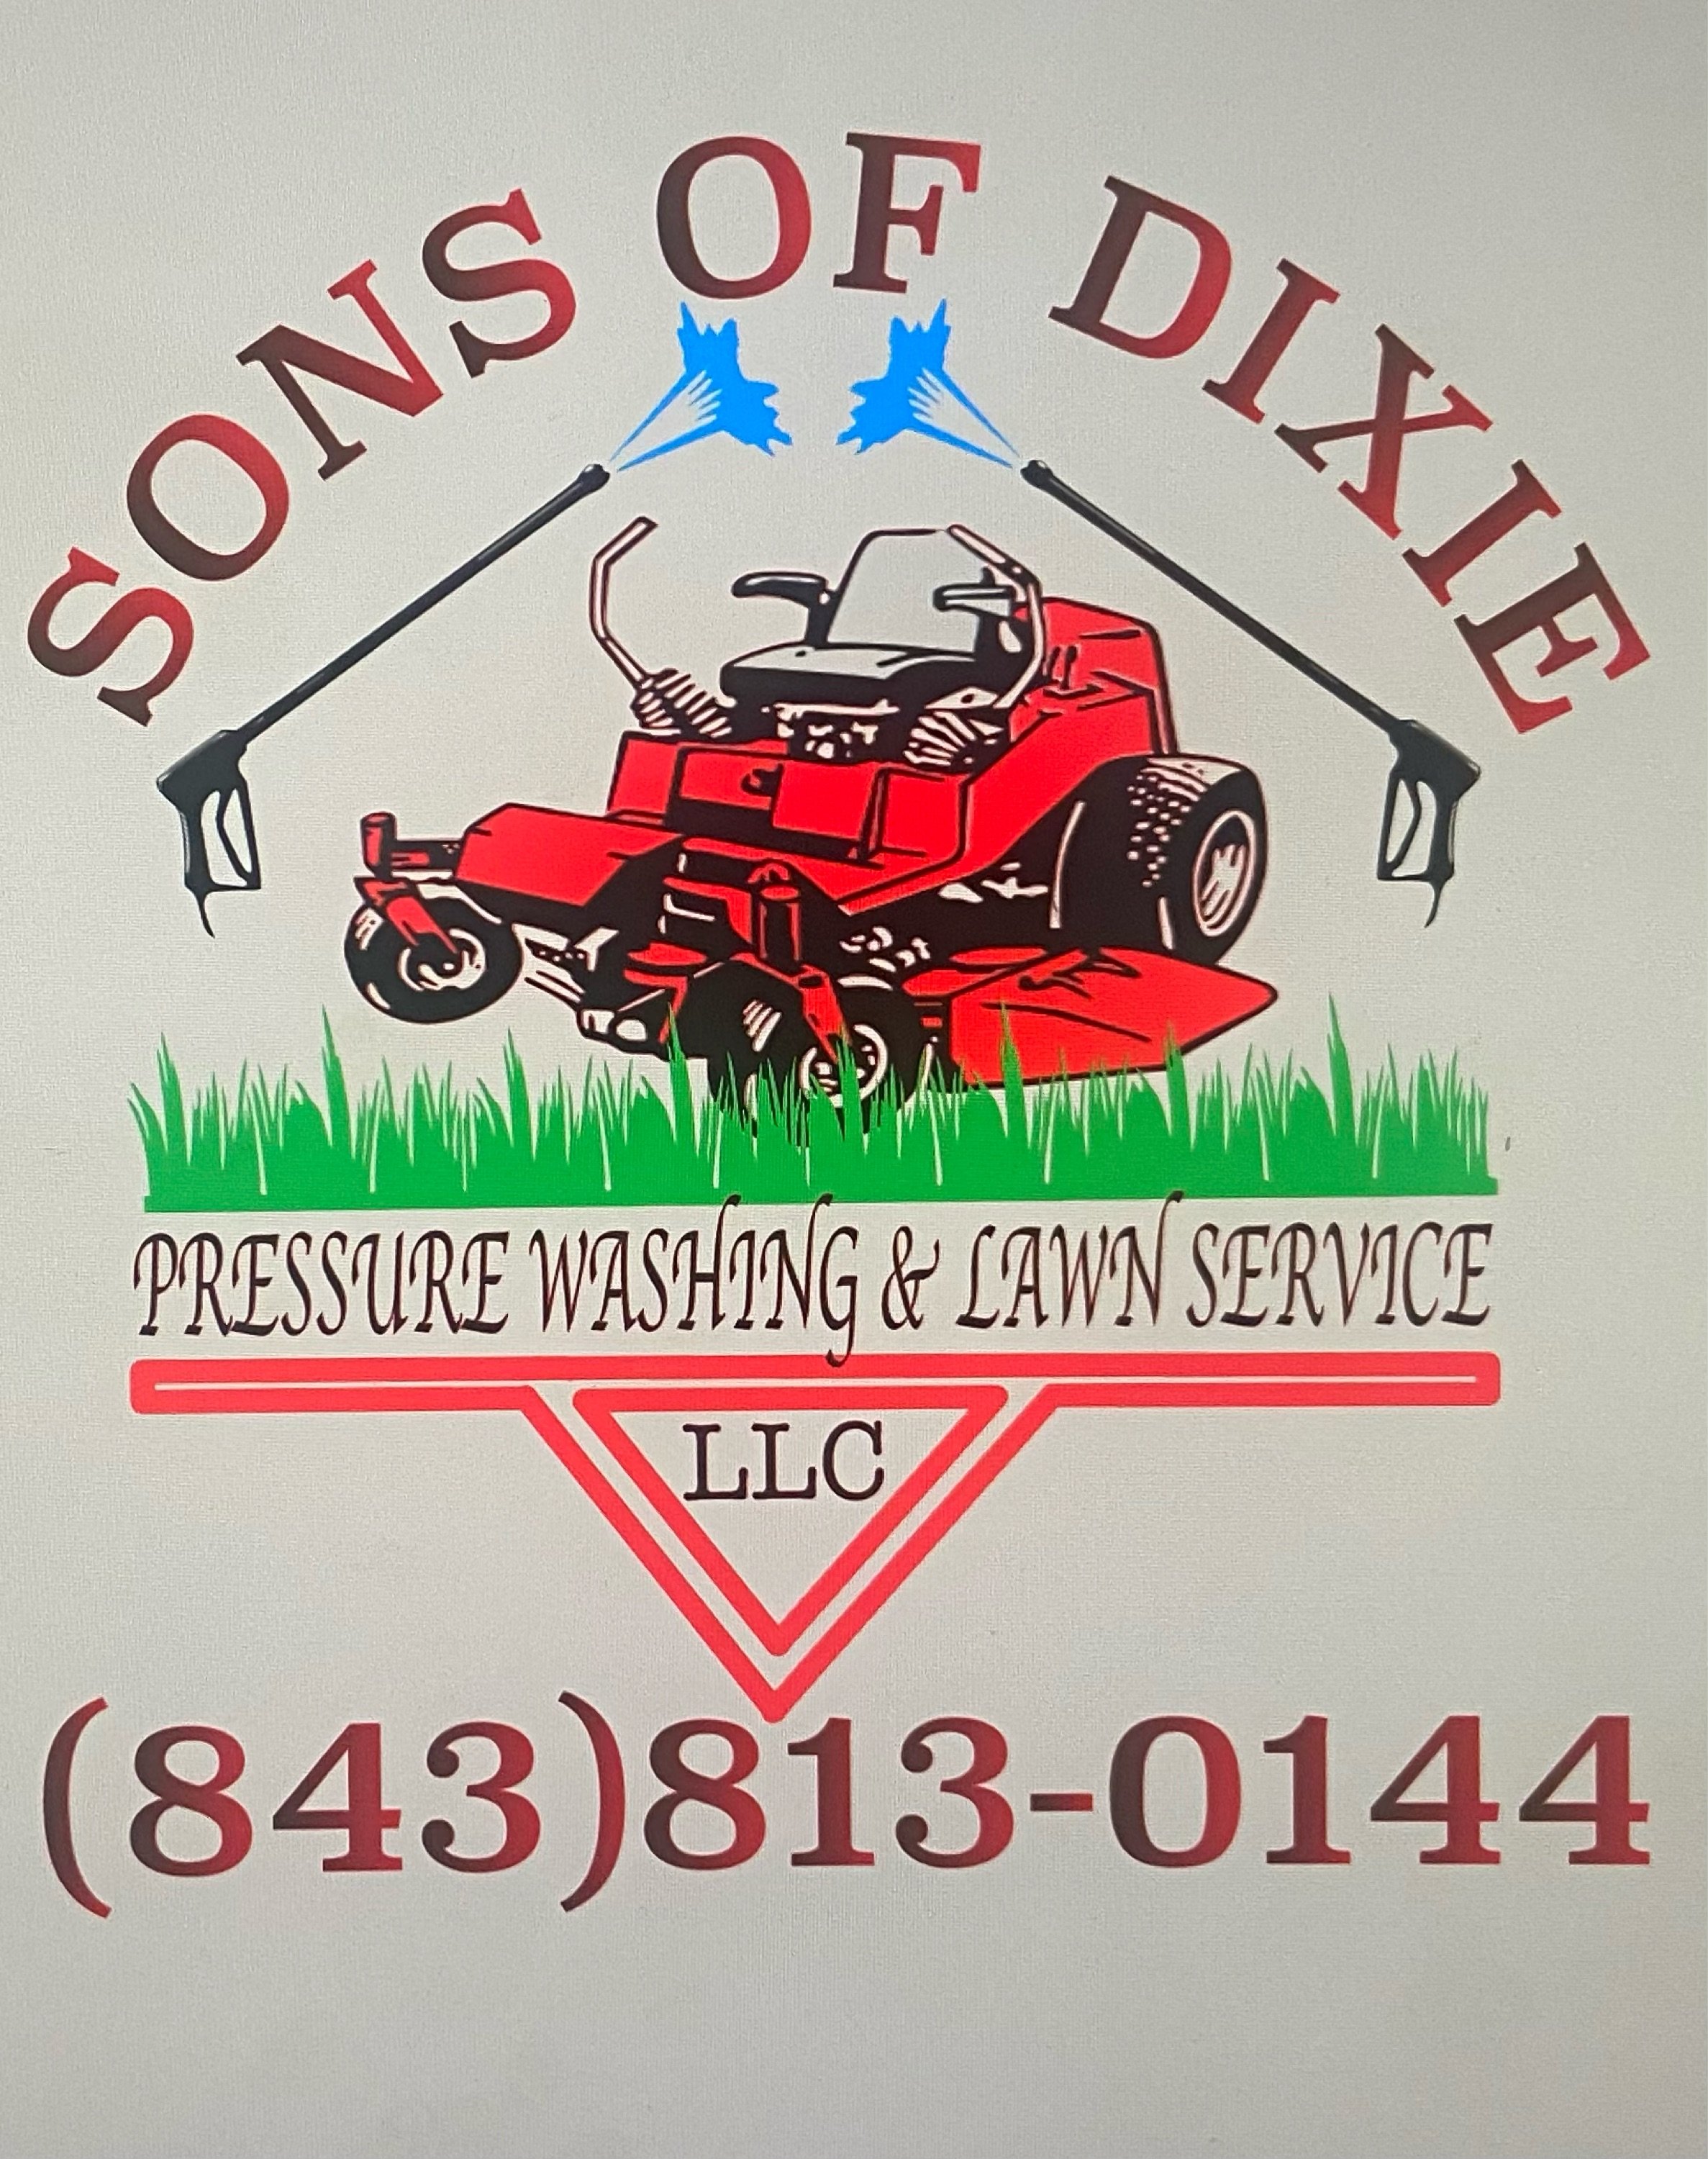 Sons Of Dixie Pressure Washing & Lawn Service Logo